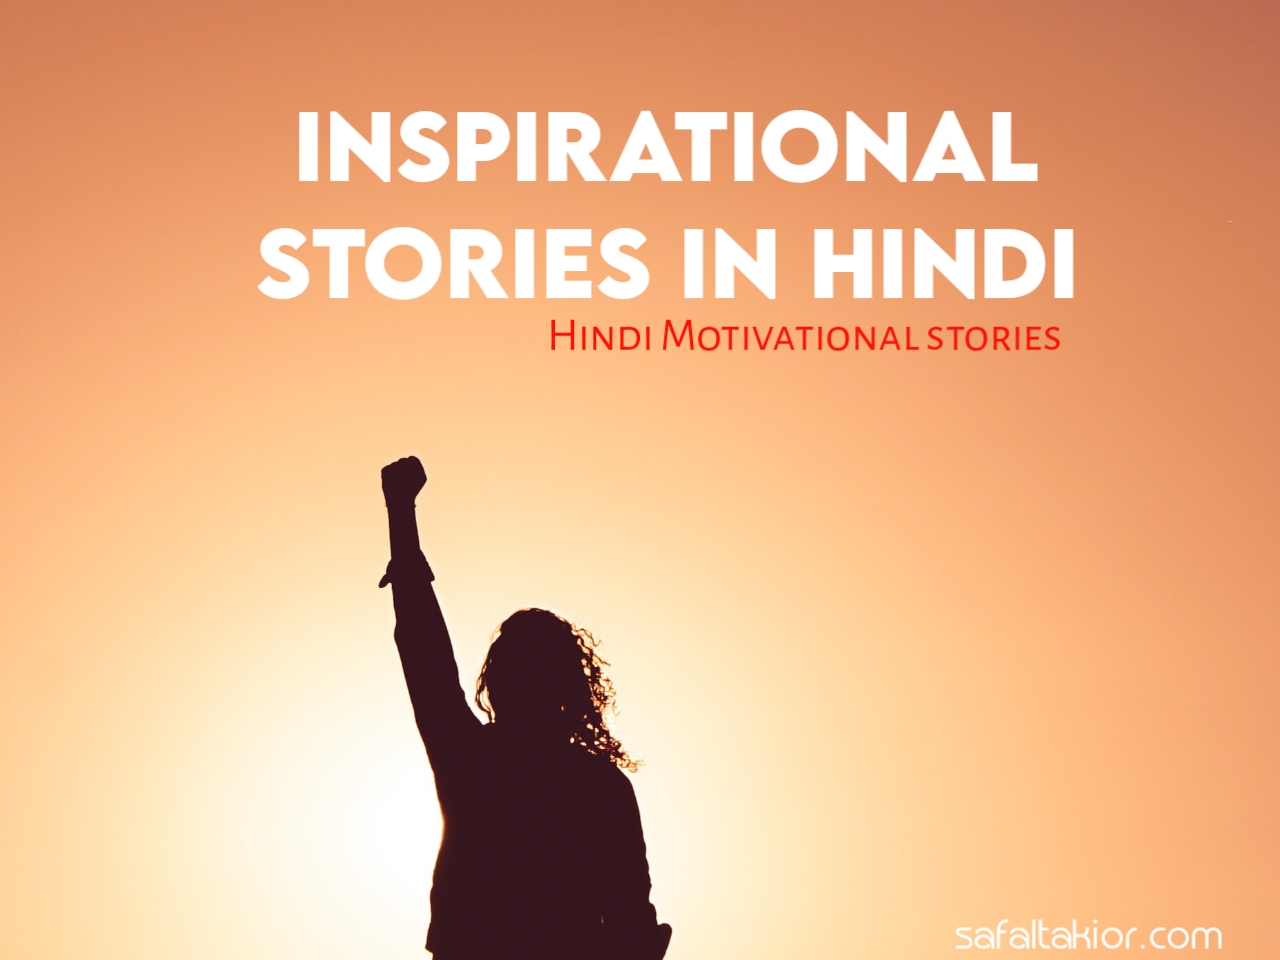 Inspirational stories in Hindi